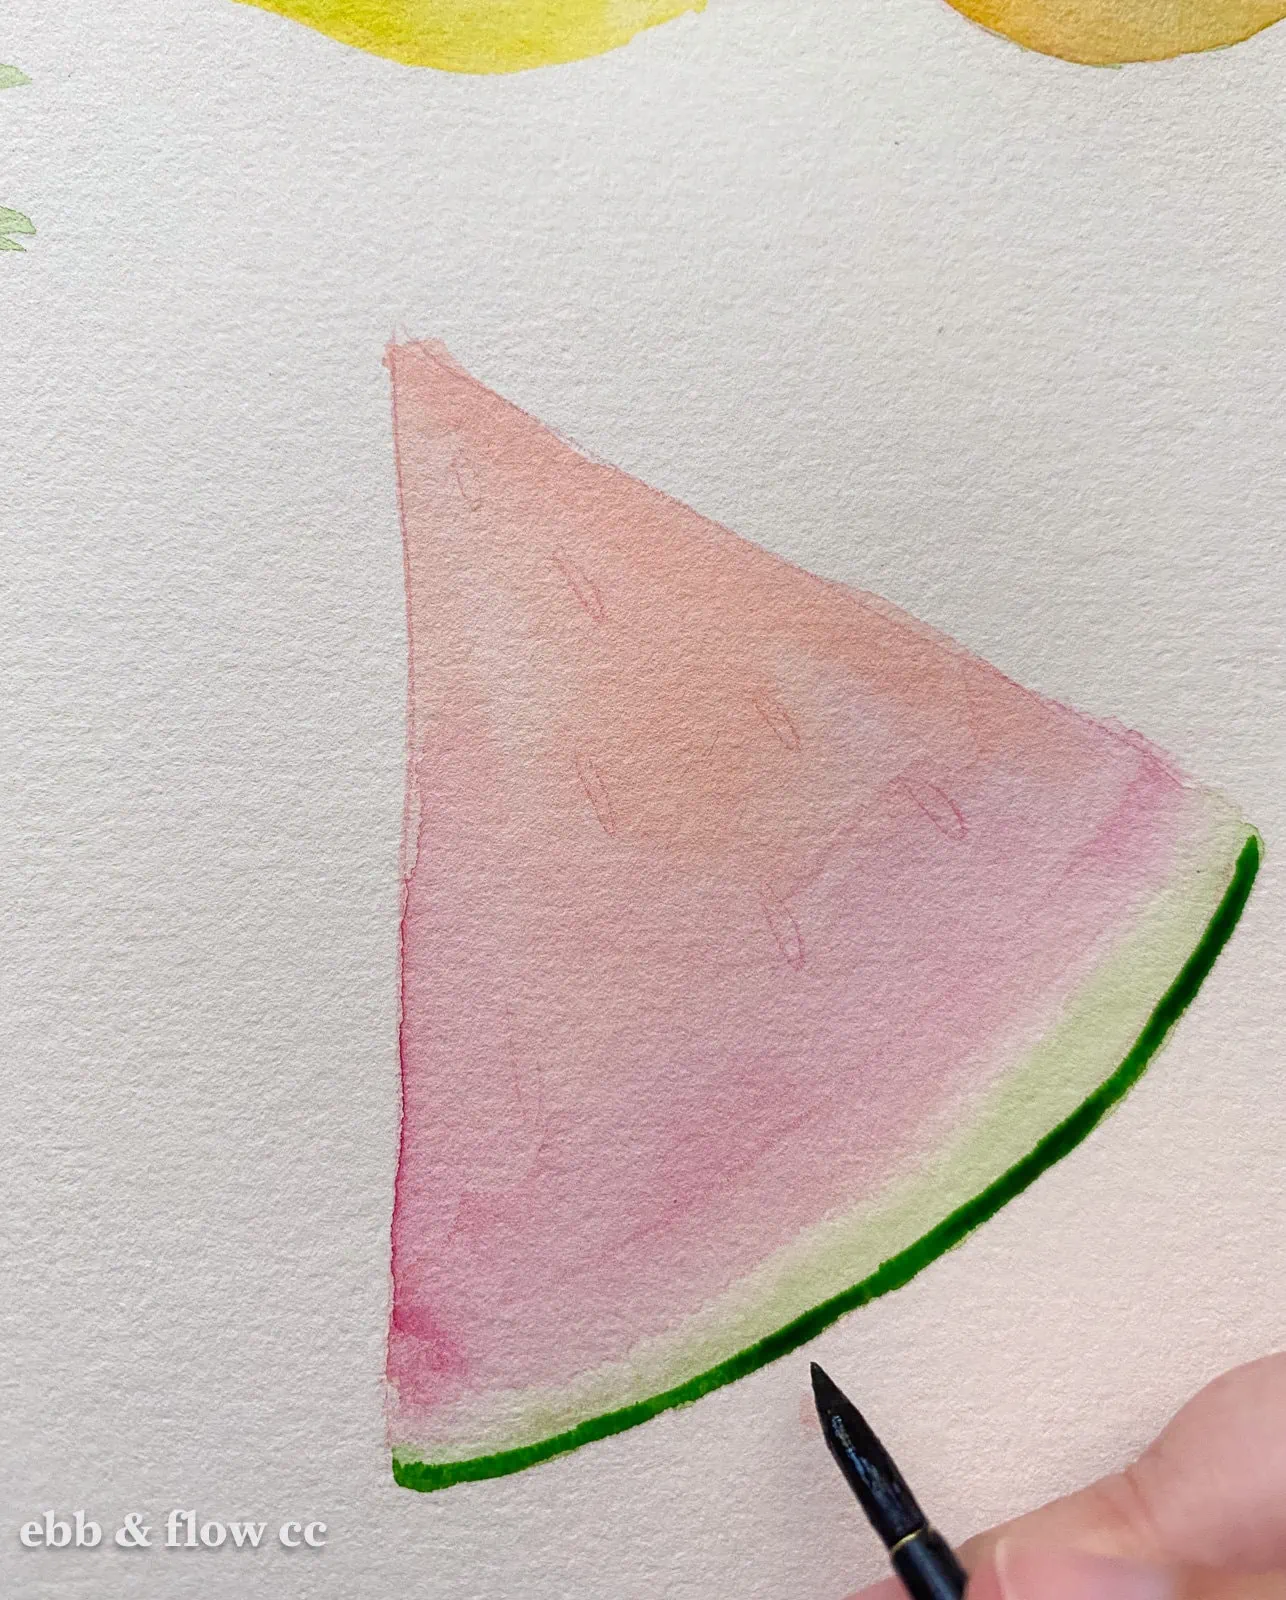 painting watermelon in watercolor